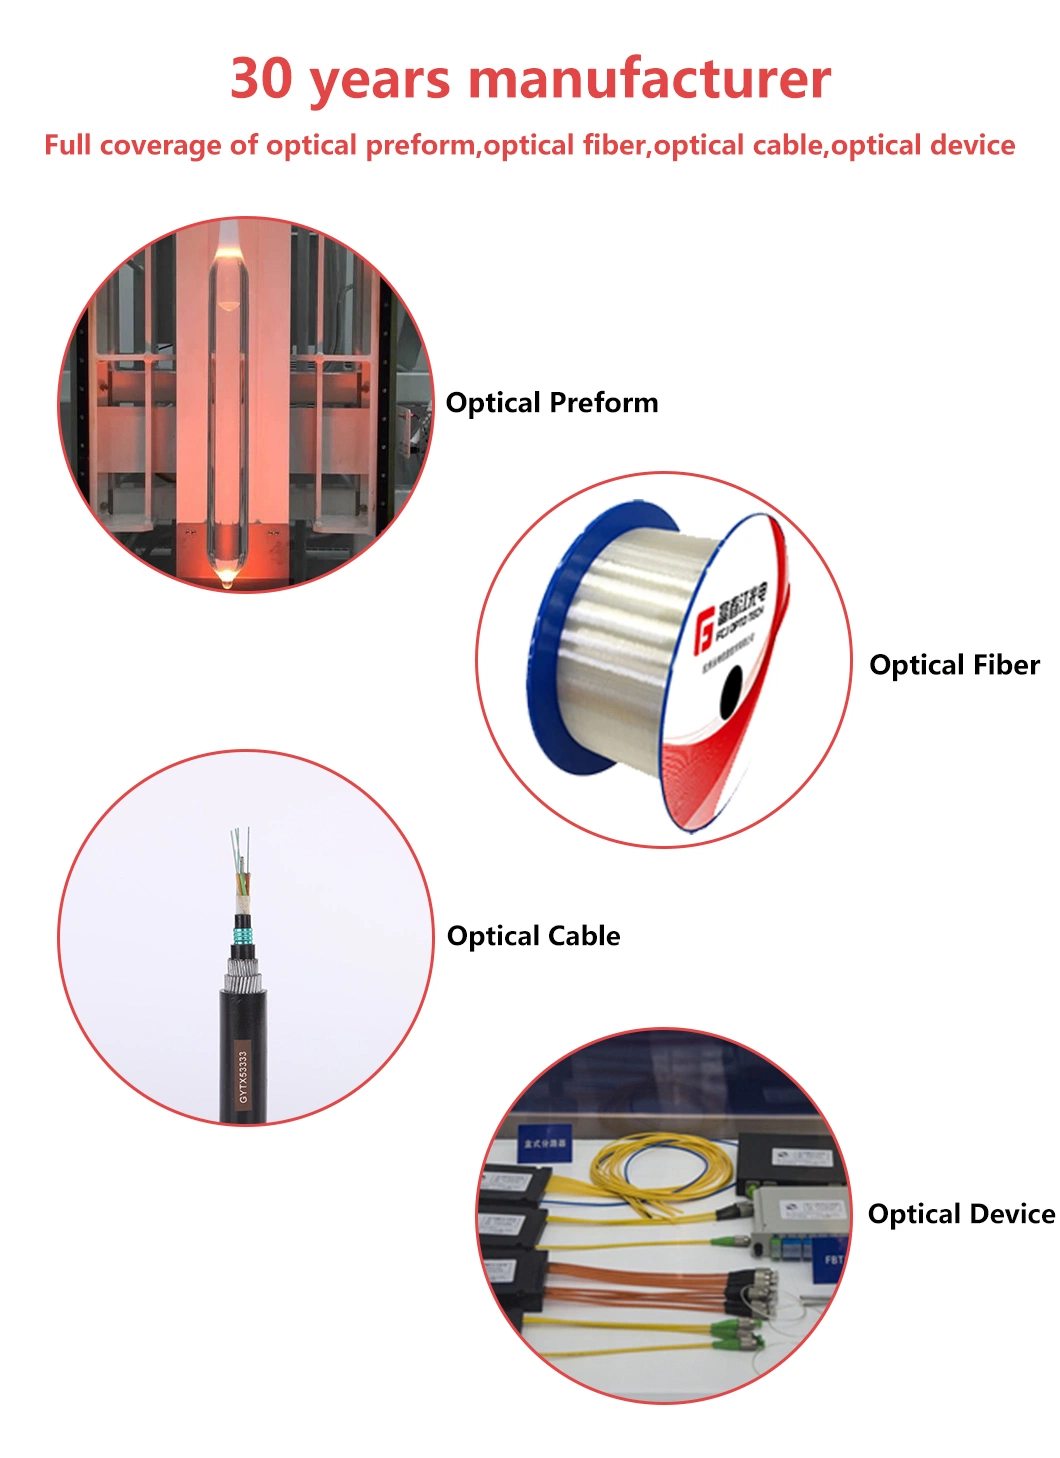 Fcj GYFXTY Network Cable Single Core Optical Outdoor Fiber Optic Cable